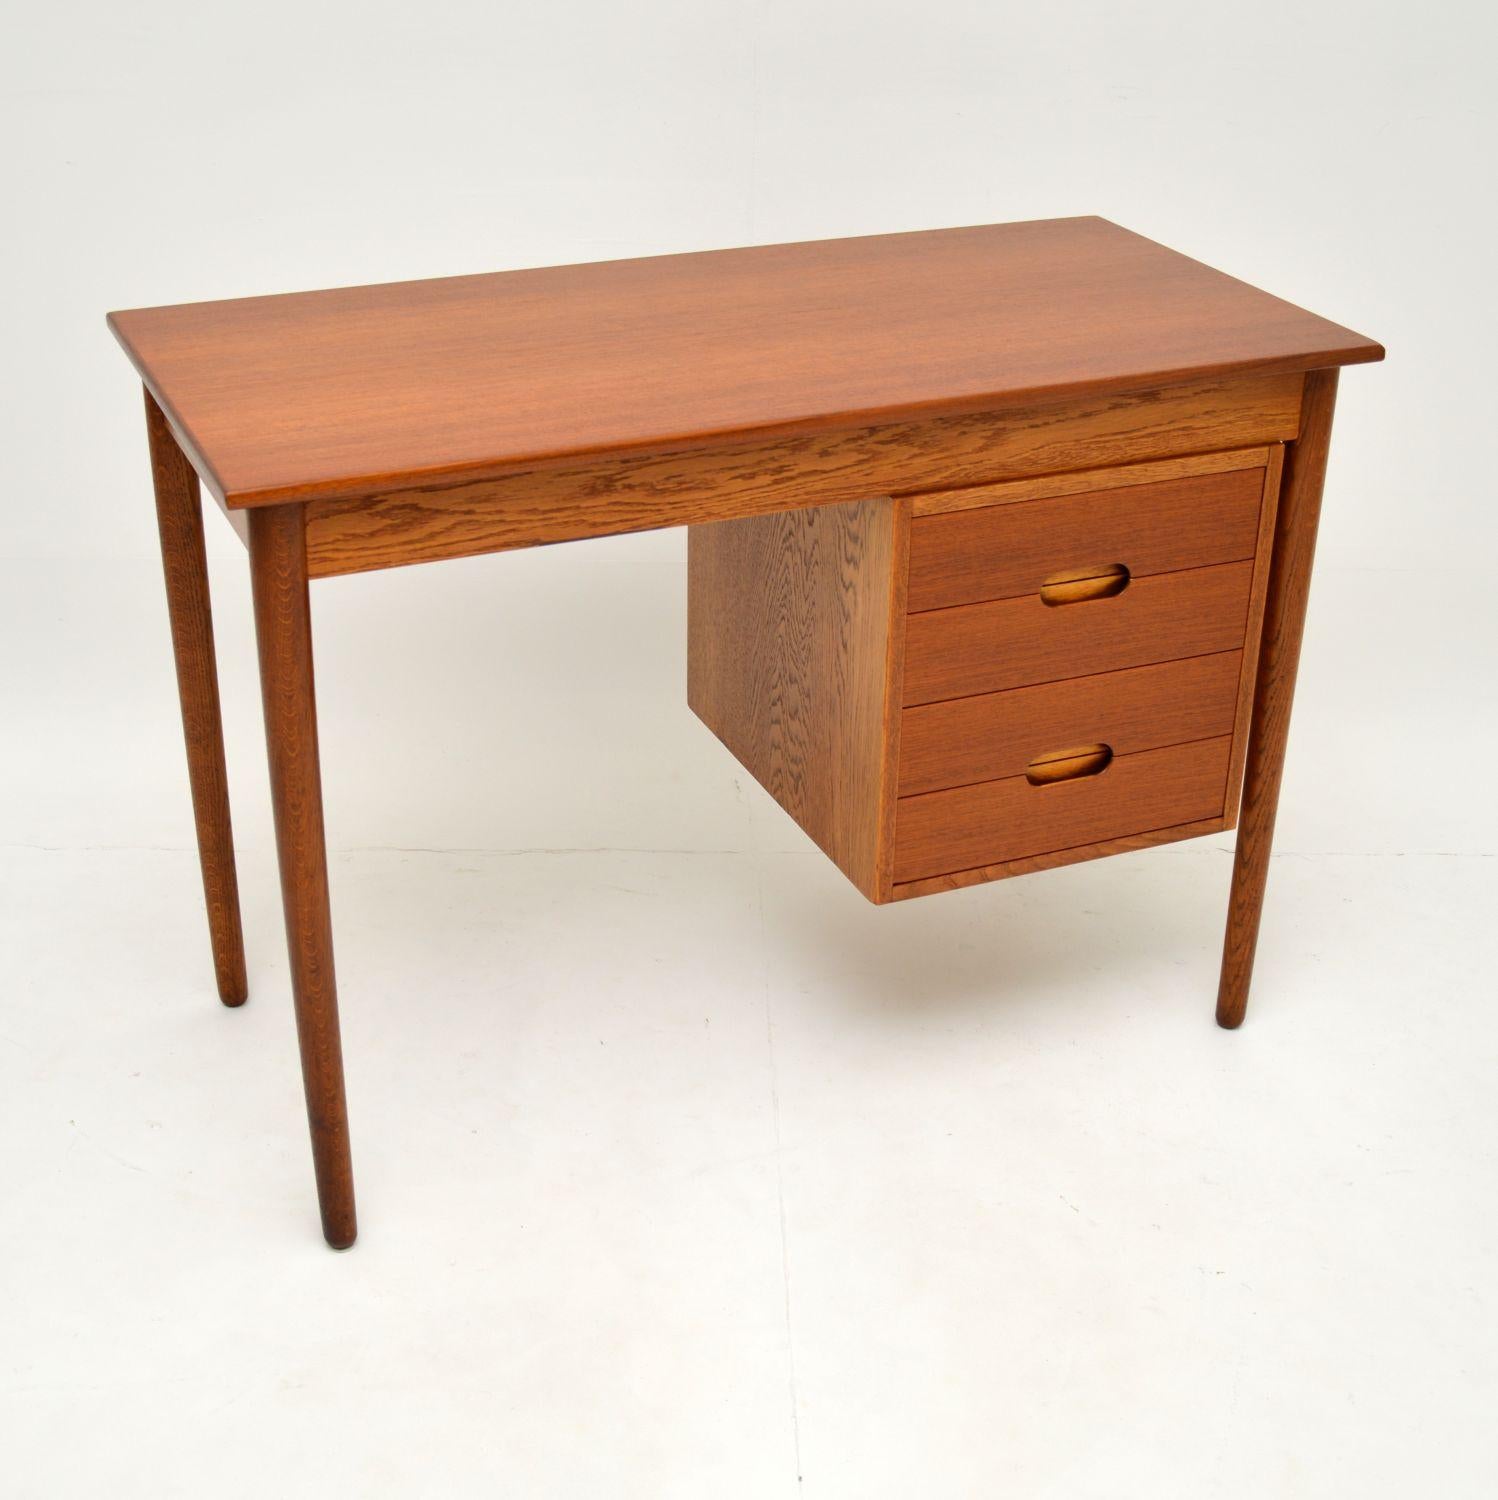 A stunning and extremely rare vintage Danish desk. This was made in Denmark by Jutex, it was designed by Arne Hovmand-Olsen.

It is beautifully made with a solid oak carcass and gorgeous teak veneers. The drawer fronts have lovely recessed